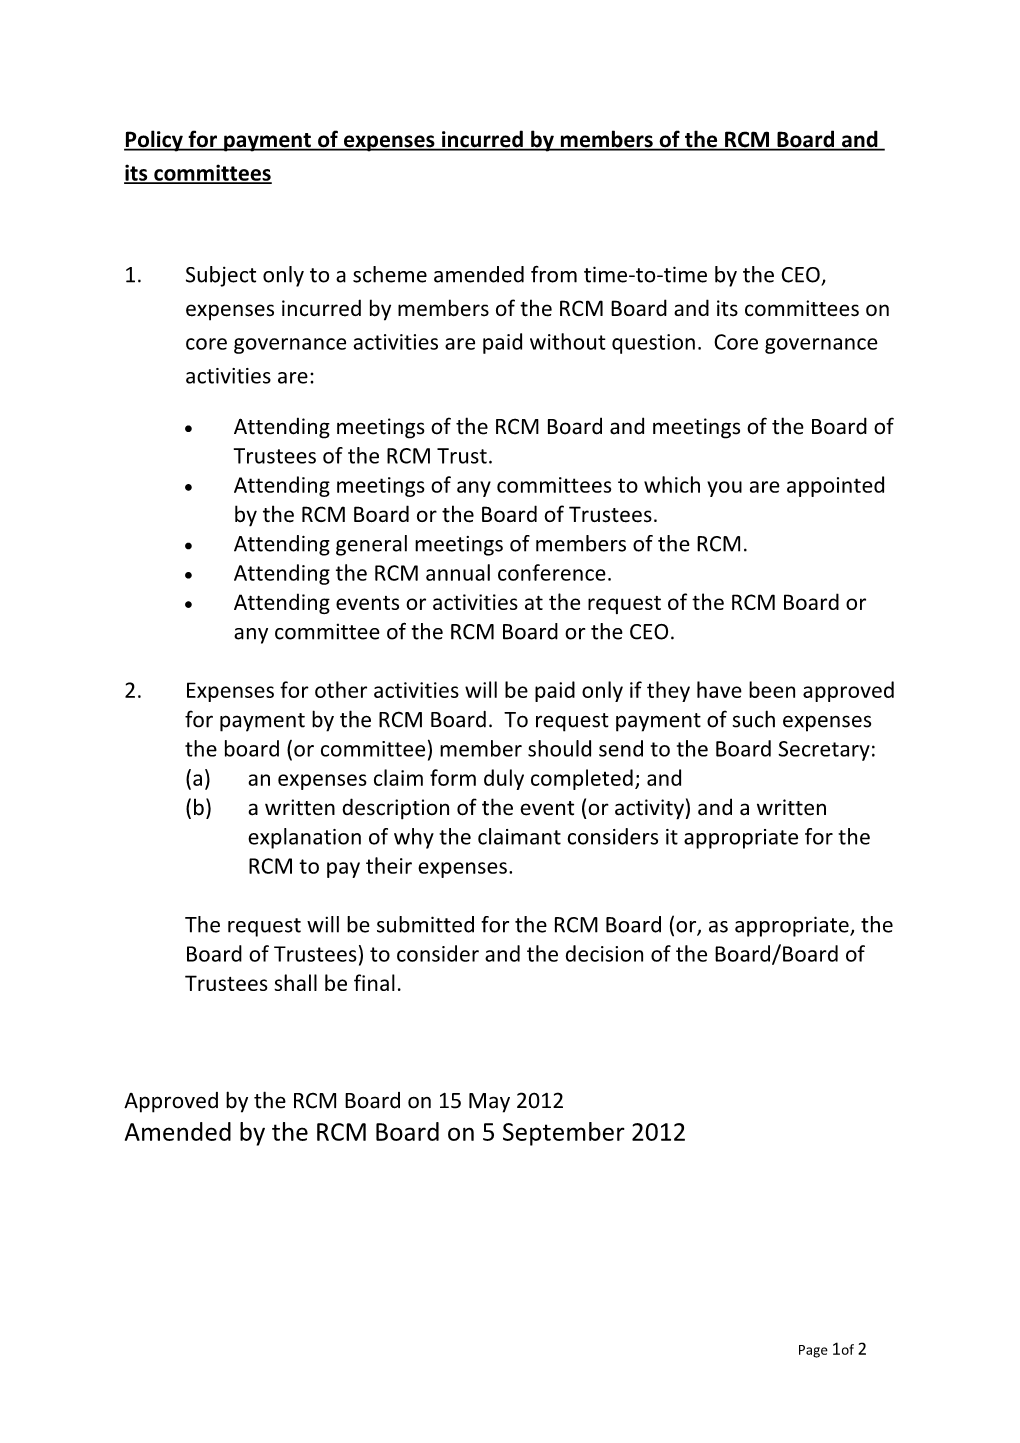 Policy for Payment of Expenses Incurred by Members of the RCM Board and Its Committees